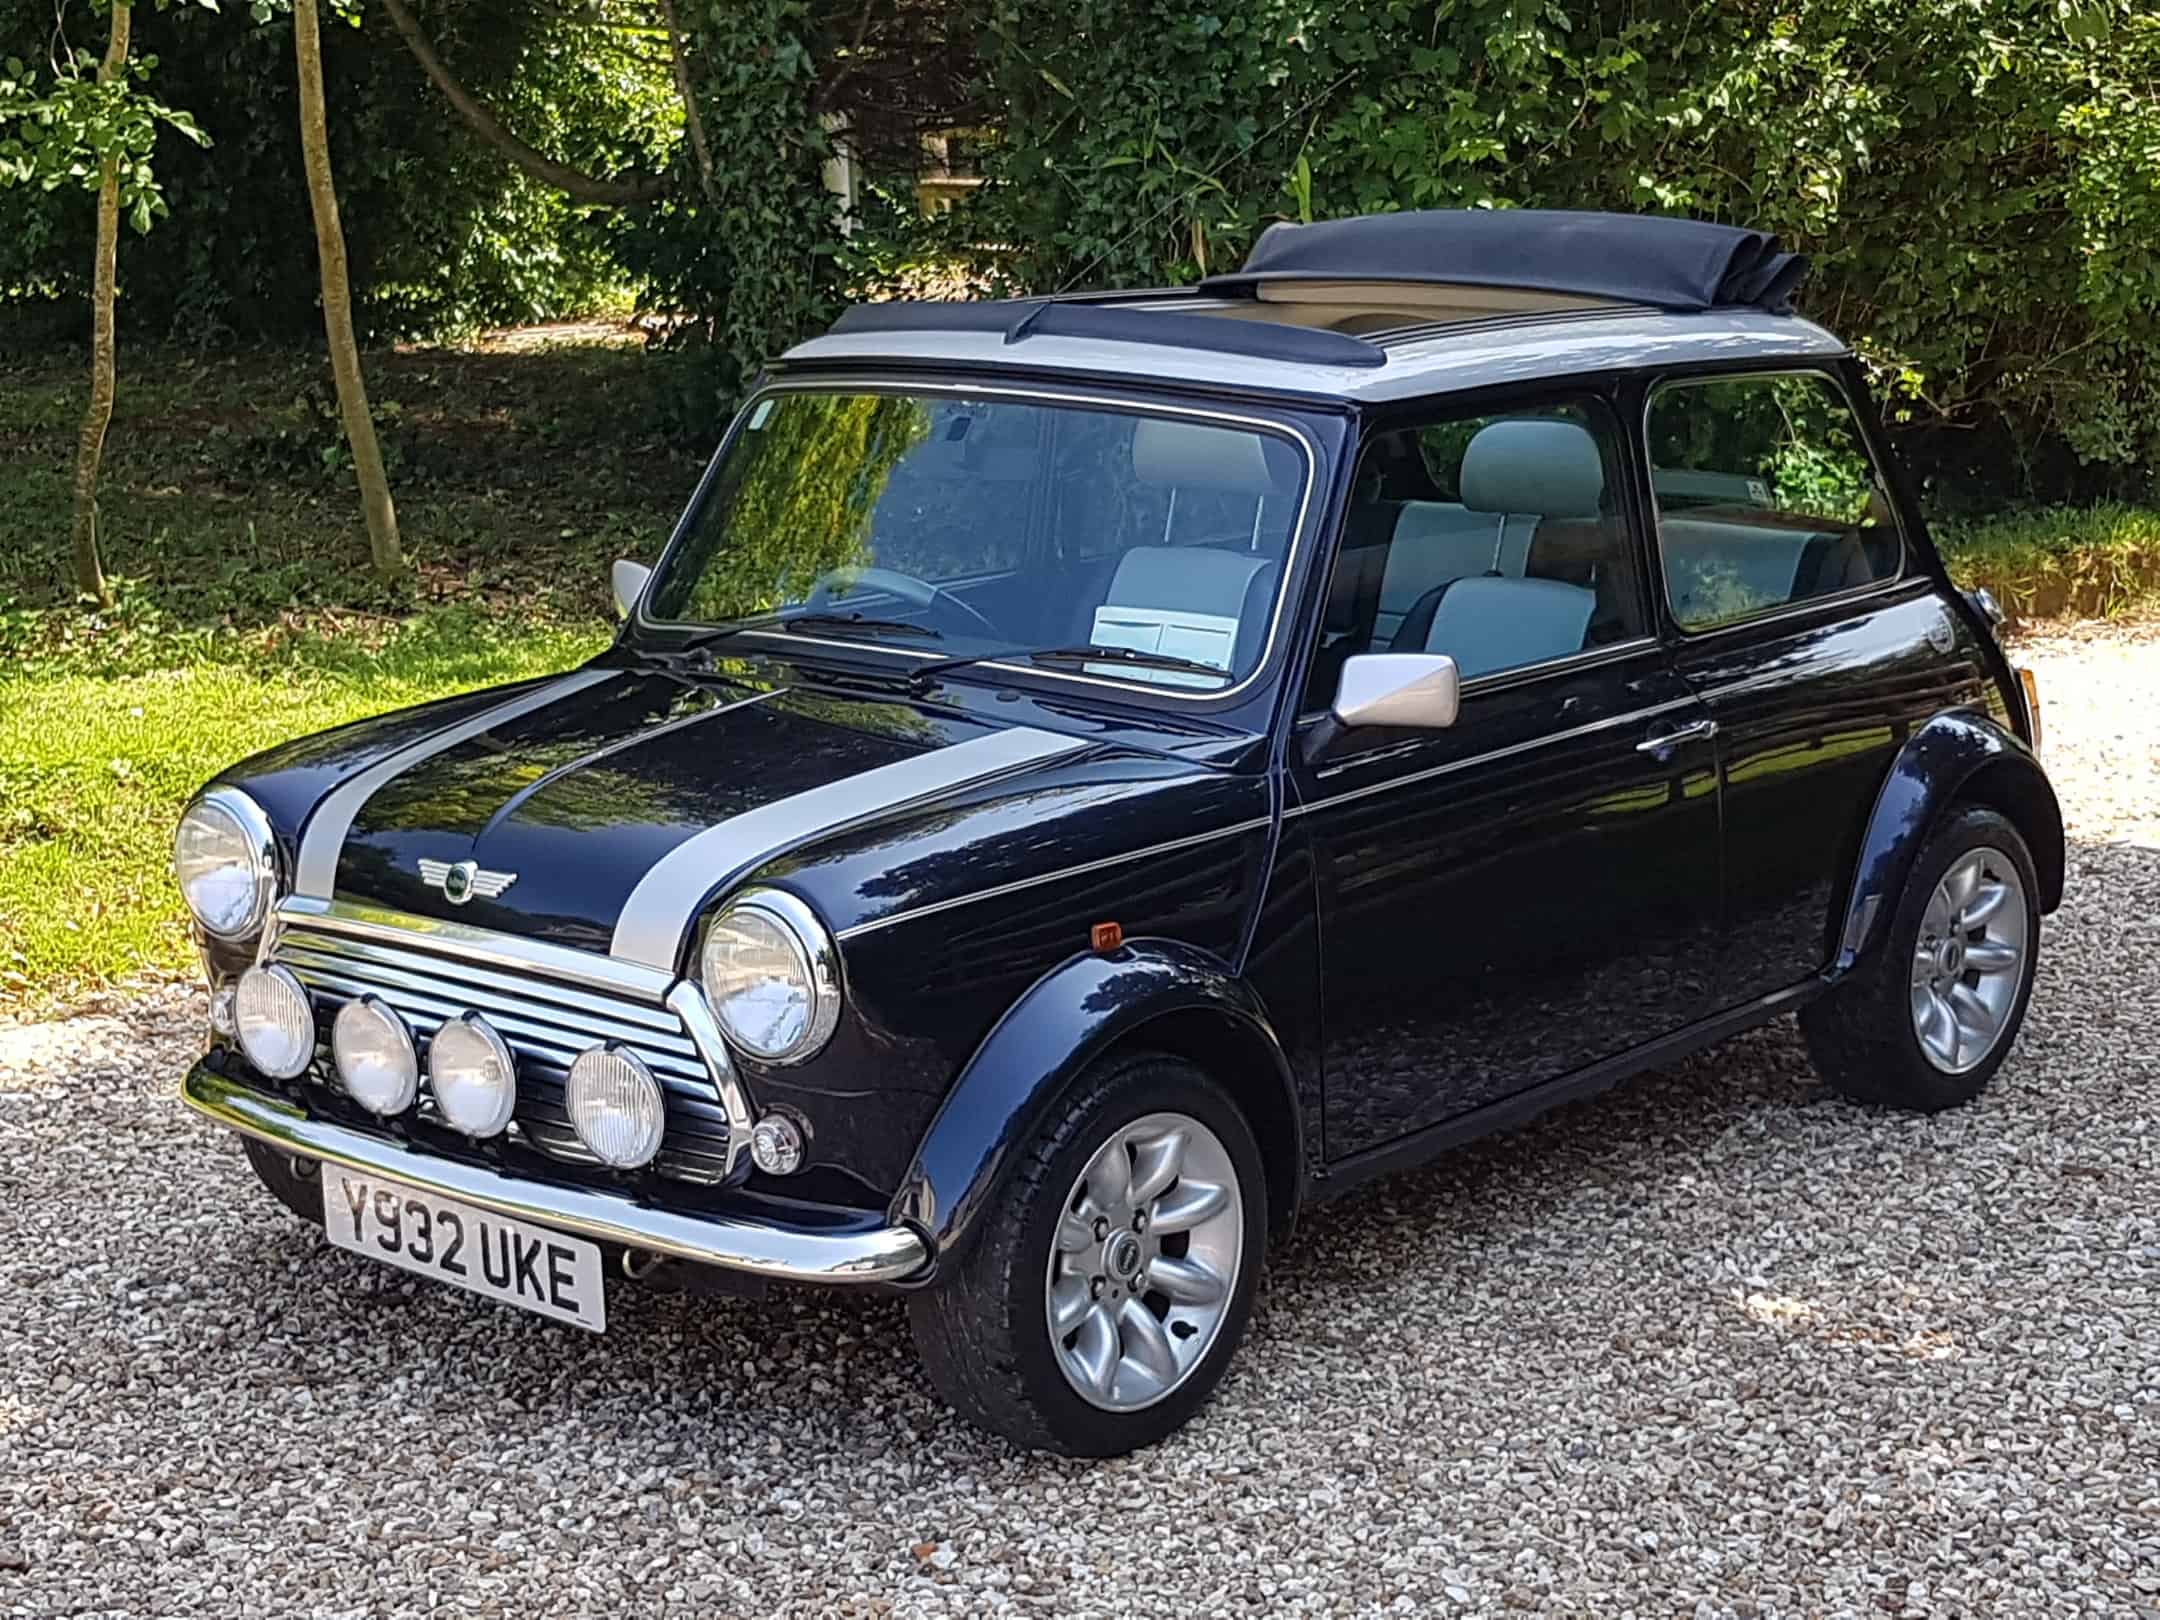 ** NOW SOLD ** Mini Cooper Sport On 1320 Miles From New